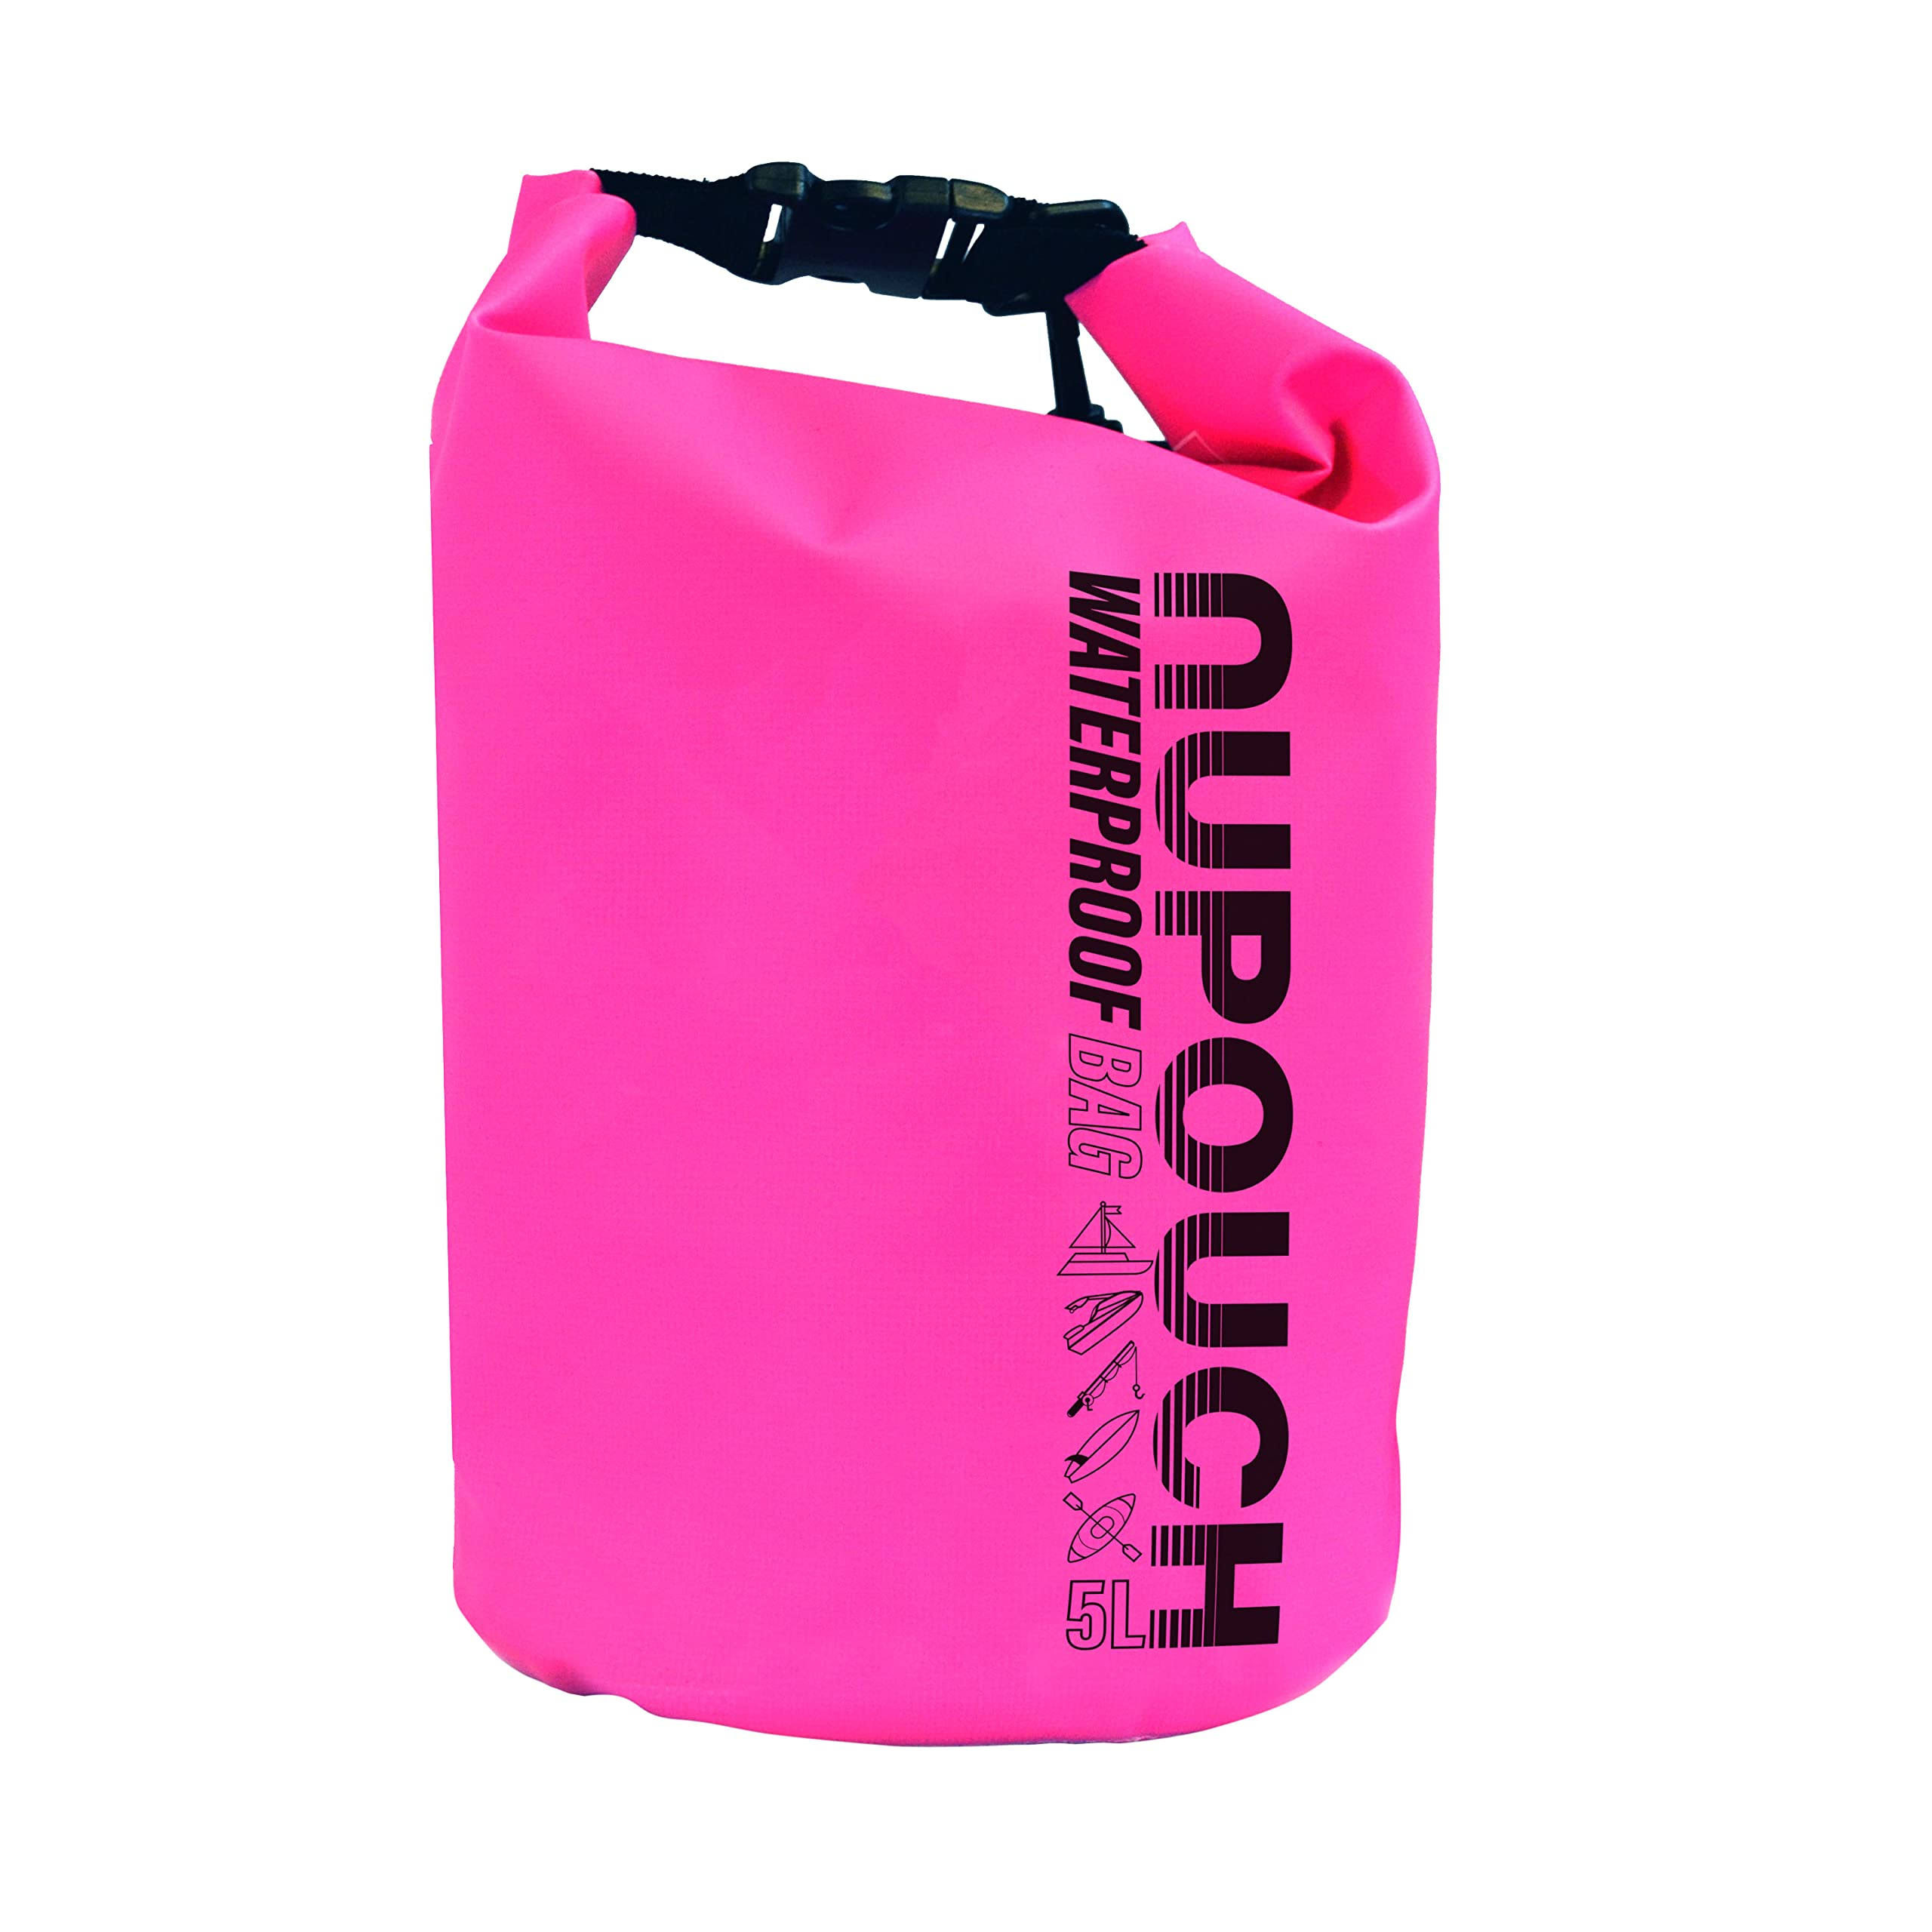 Nupouch Water Proof Bag - Pink, 5L